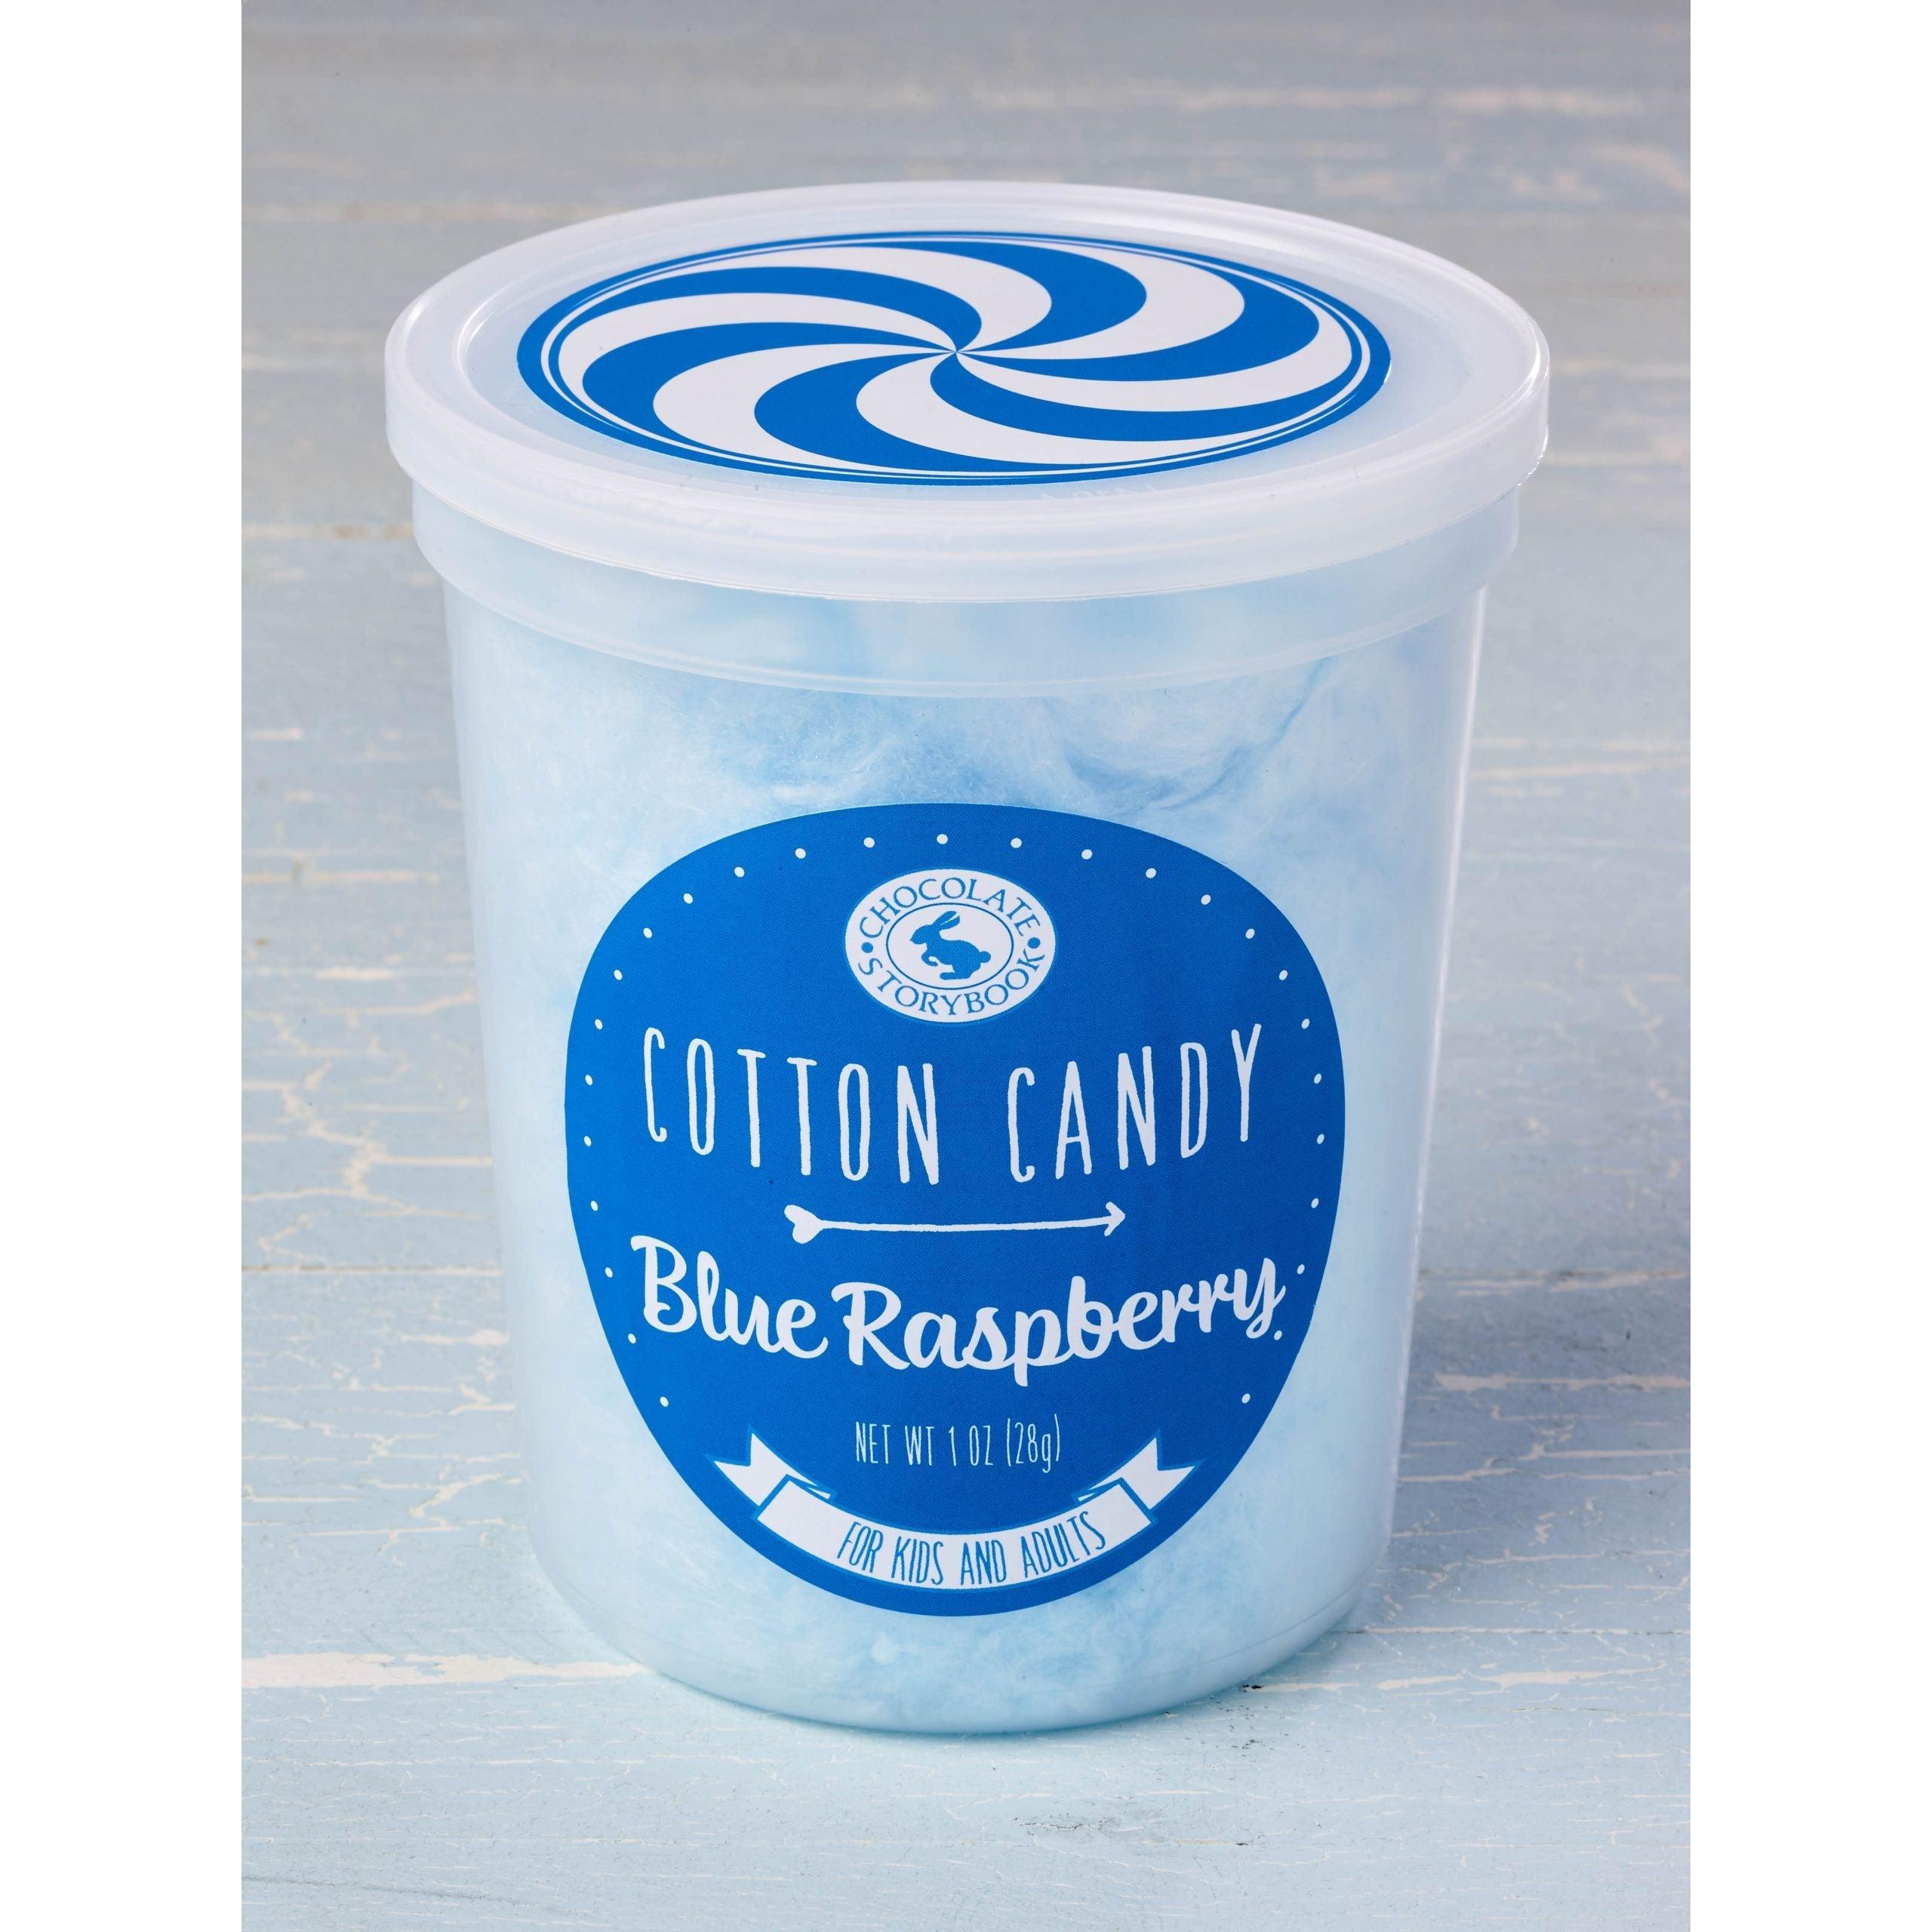 Chocolate Storybook-Blue Raspberry Gourmet Cotton Candy-CSB-BR-Legacy Toys